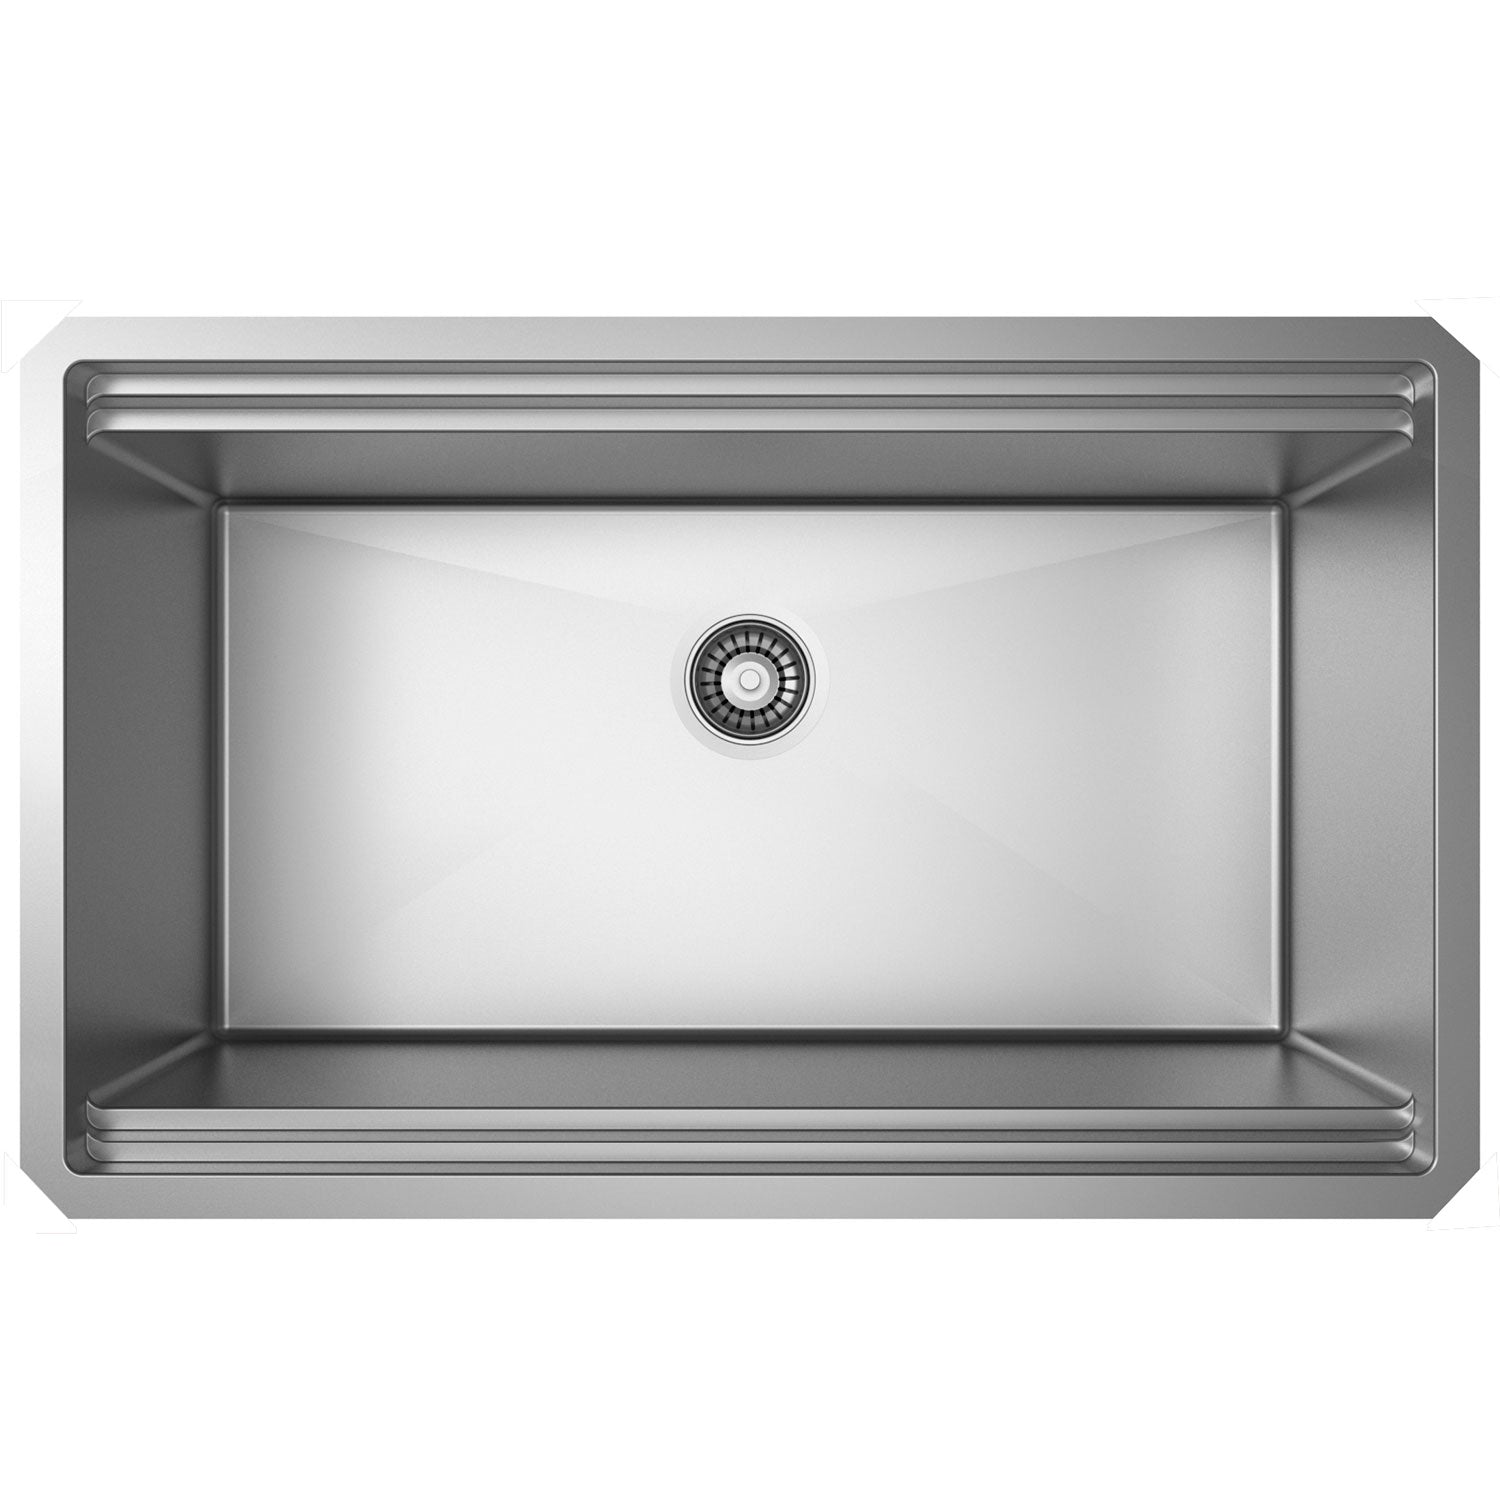 DAX Workstation Single Bowl Double Level Sink 30 x 18 - R10 - 18G. Accessories Included (DX-WS23019-R10)